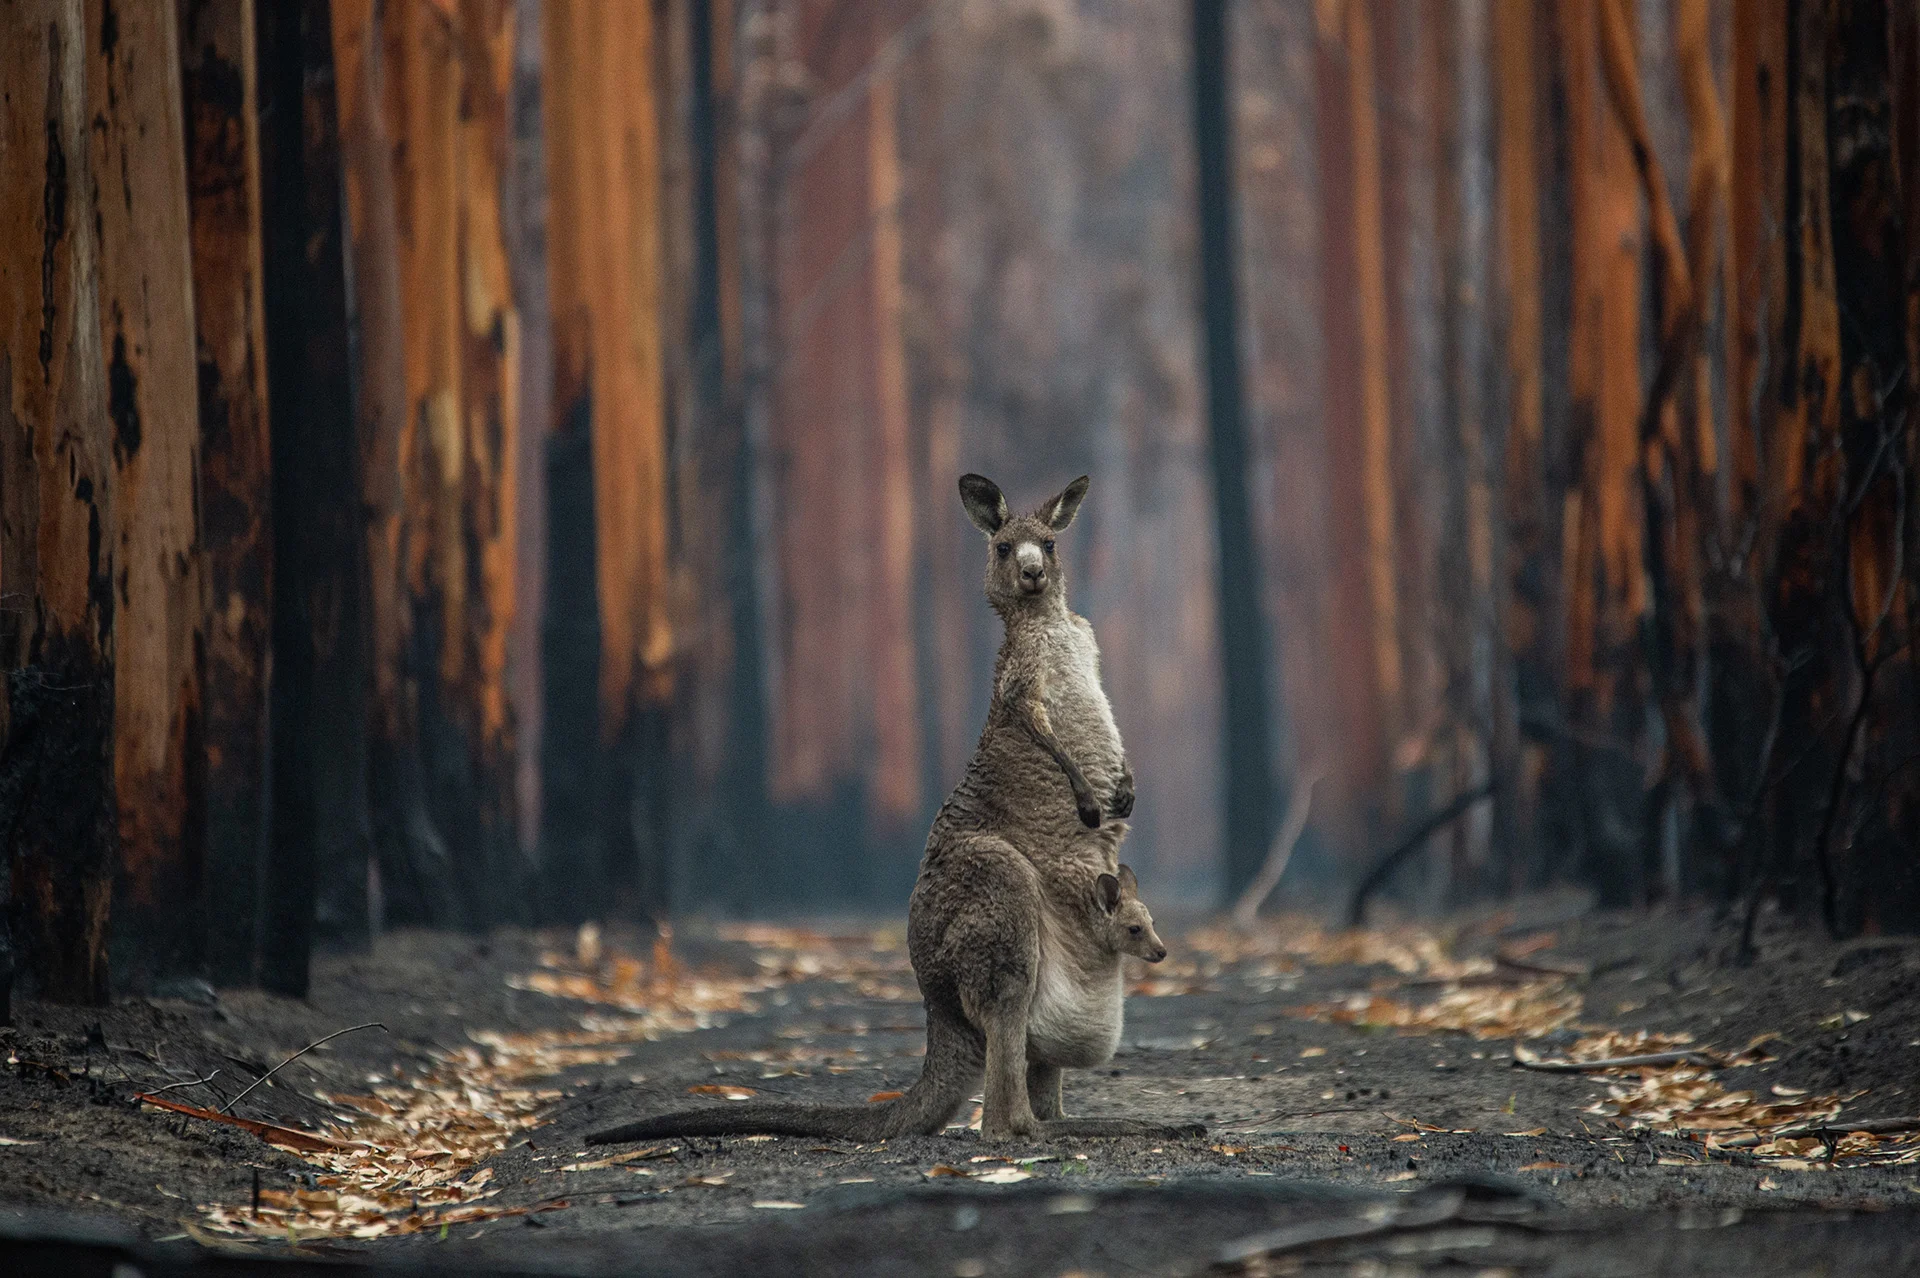 An Eastern grey kangaroo and her joey who survived the forest fires in Mallacoota, Australia. Photo Credit: Jo-Anne McArthur/We Animals Media